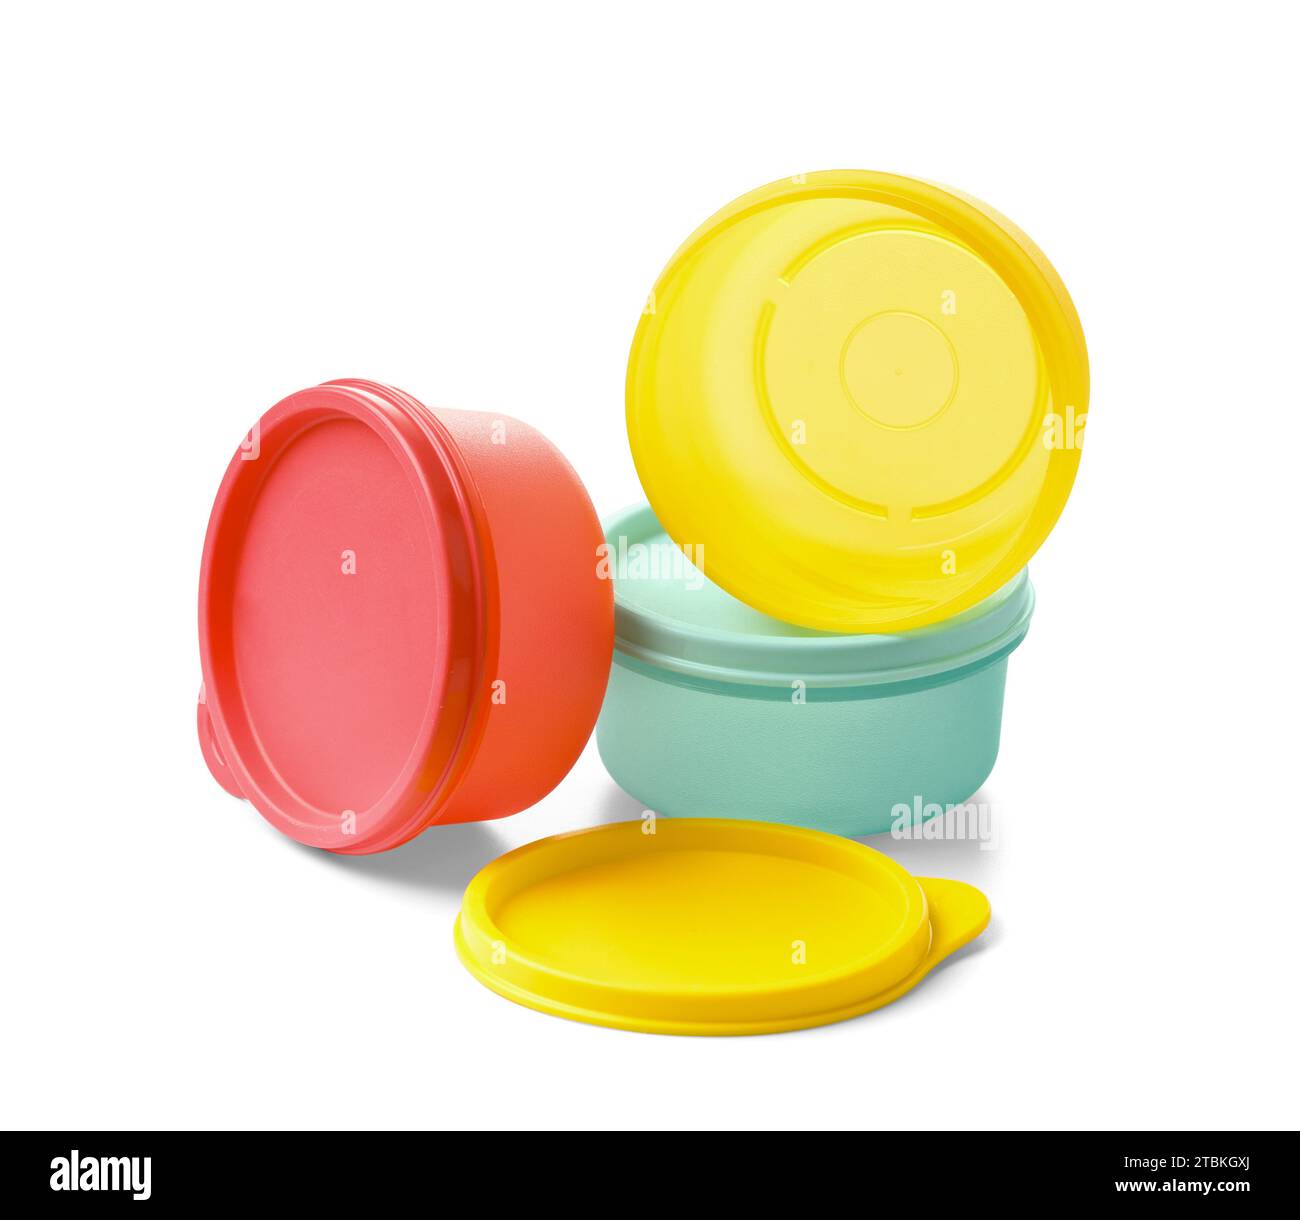 https://c8.alamy.com/comp/2TBKGXJ/multi-colored-plastic-food-containers-with-sealed-lids-on-a-white-background-eco-plastic-utensils-for-long-term-food-storage-2TBKGXJ.jpg